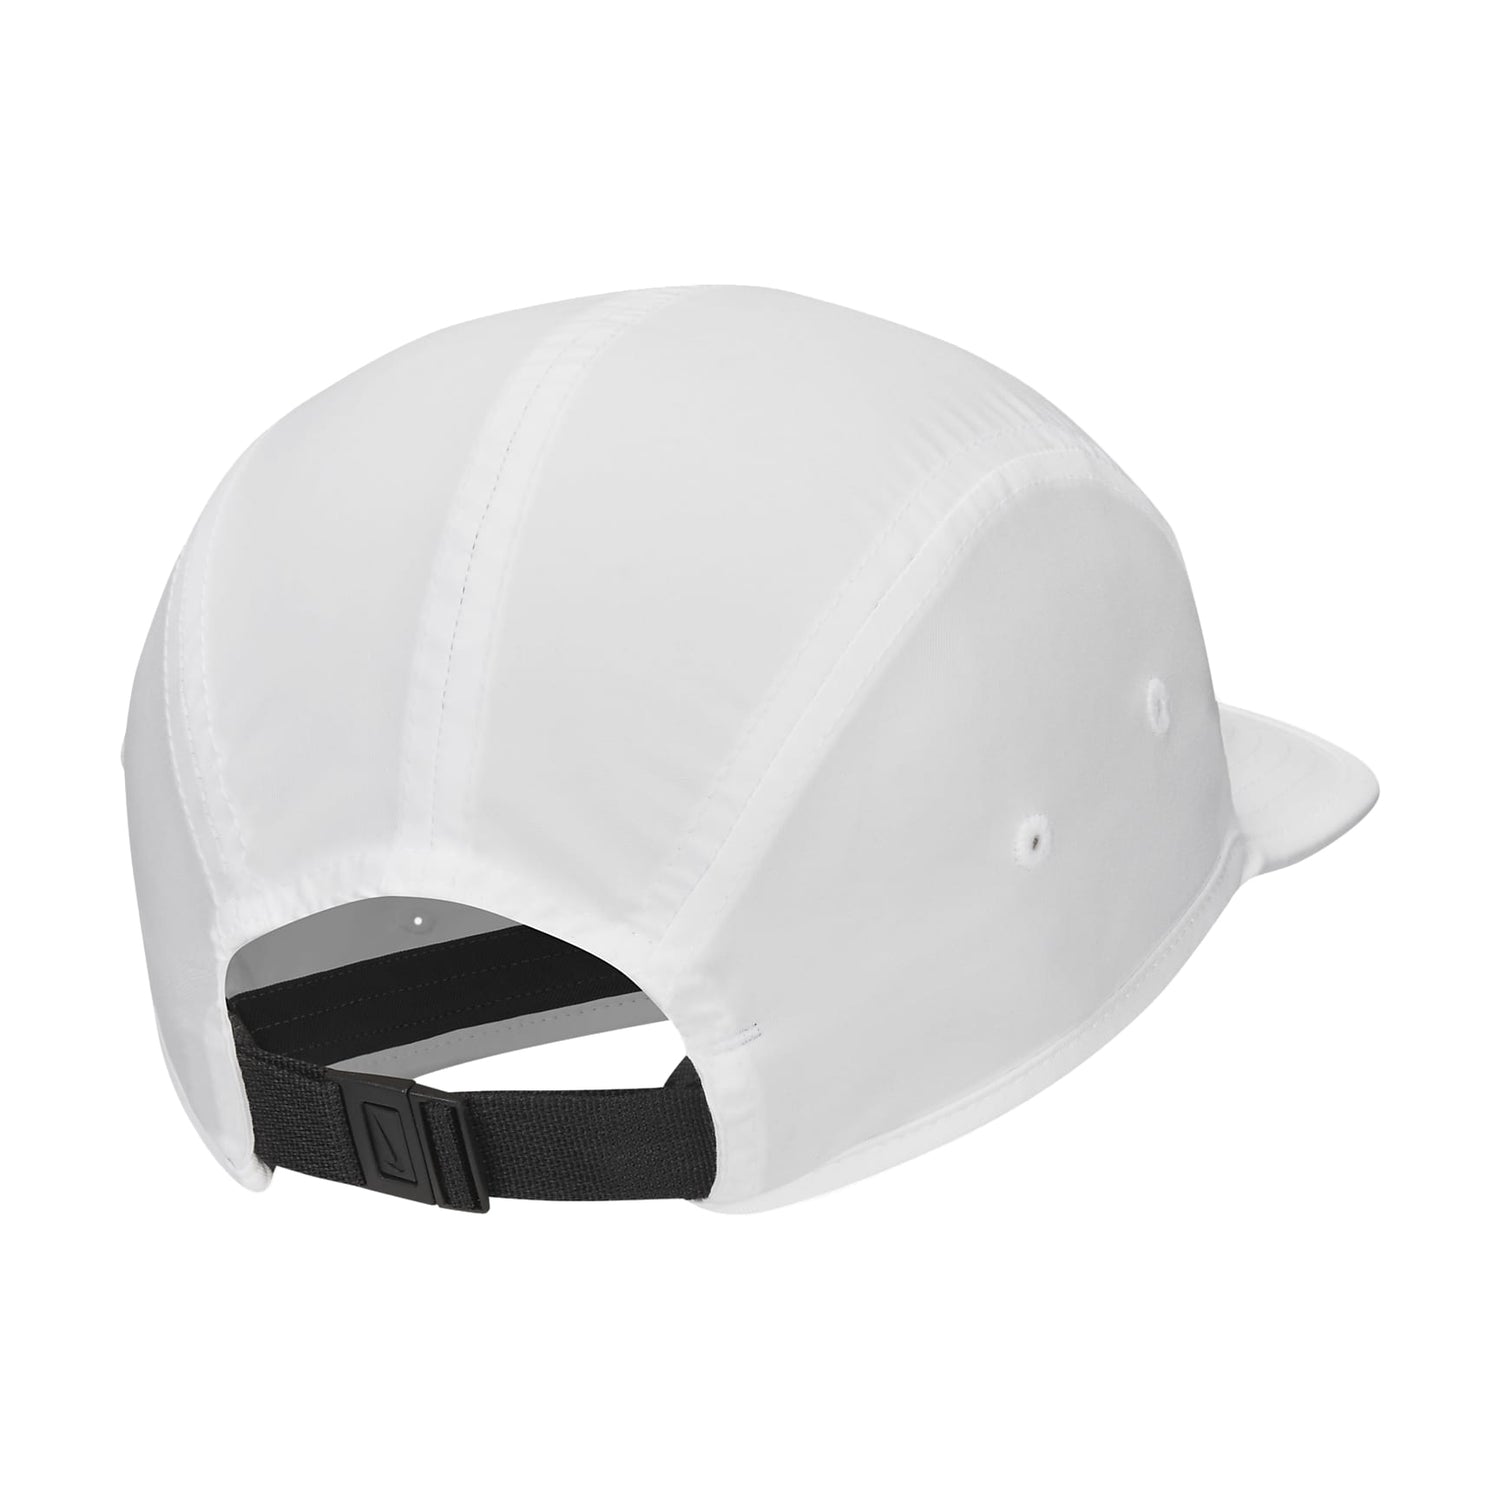 NIKE DRI-FIT FLY HAT WHITE / ANTHRACITE / BLACK